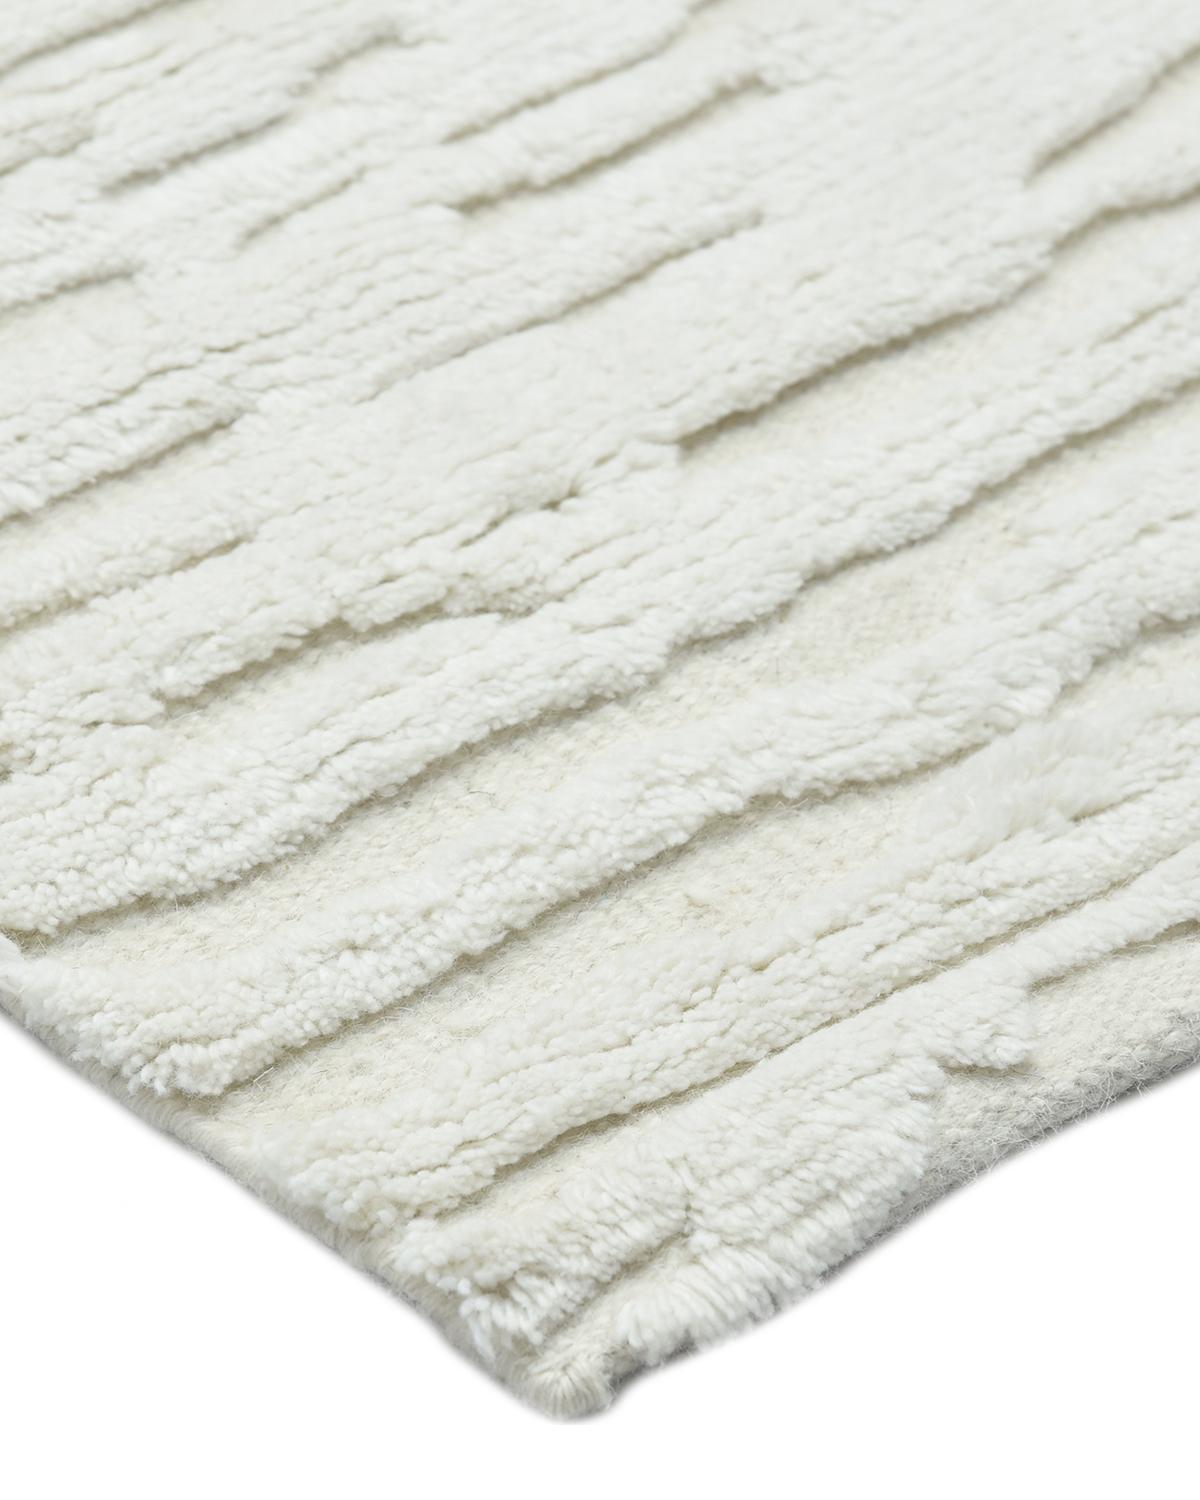 Color: Ivory. Made in: India. 80% wool, 20% cotton. Fresh, spirited, and above all, luxurious, the rugs of the Modern collection can invigorate a traditional room as gracefully as they can ground a more contemporary space. Regardless of their color